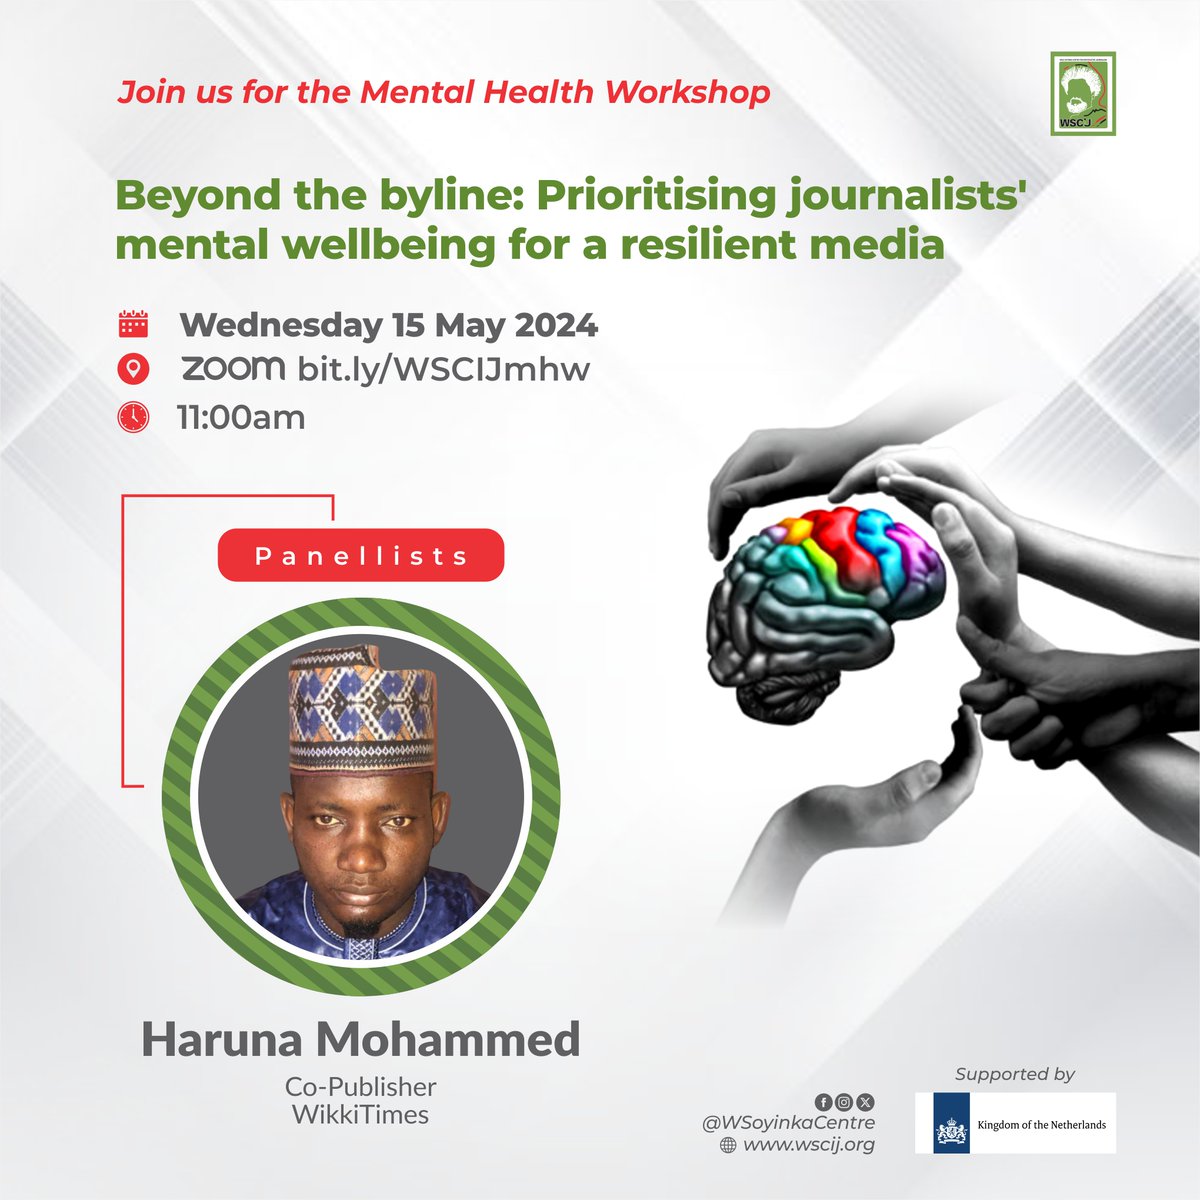 After being assaulted and detained by @PoliceNG, @haruna_babale, co-publisher of @wikkitimes, will address measures needed to prioritise journalists' mental health for a resilient media landscape. Join him at the @WSoyinkaCentre's #MentalHealth workshop. bit.ly/WSCIJmhw